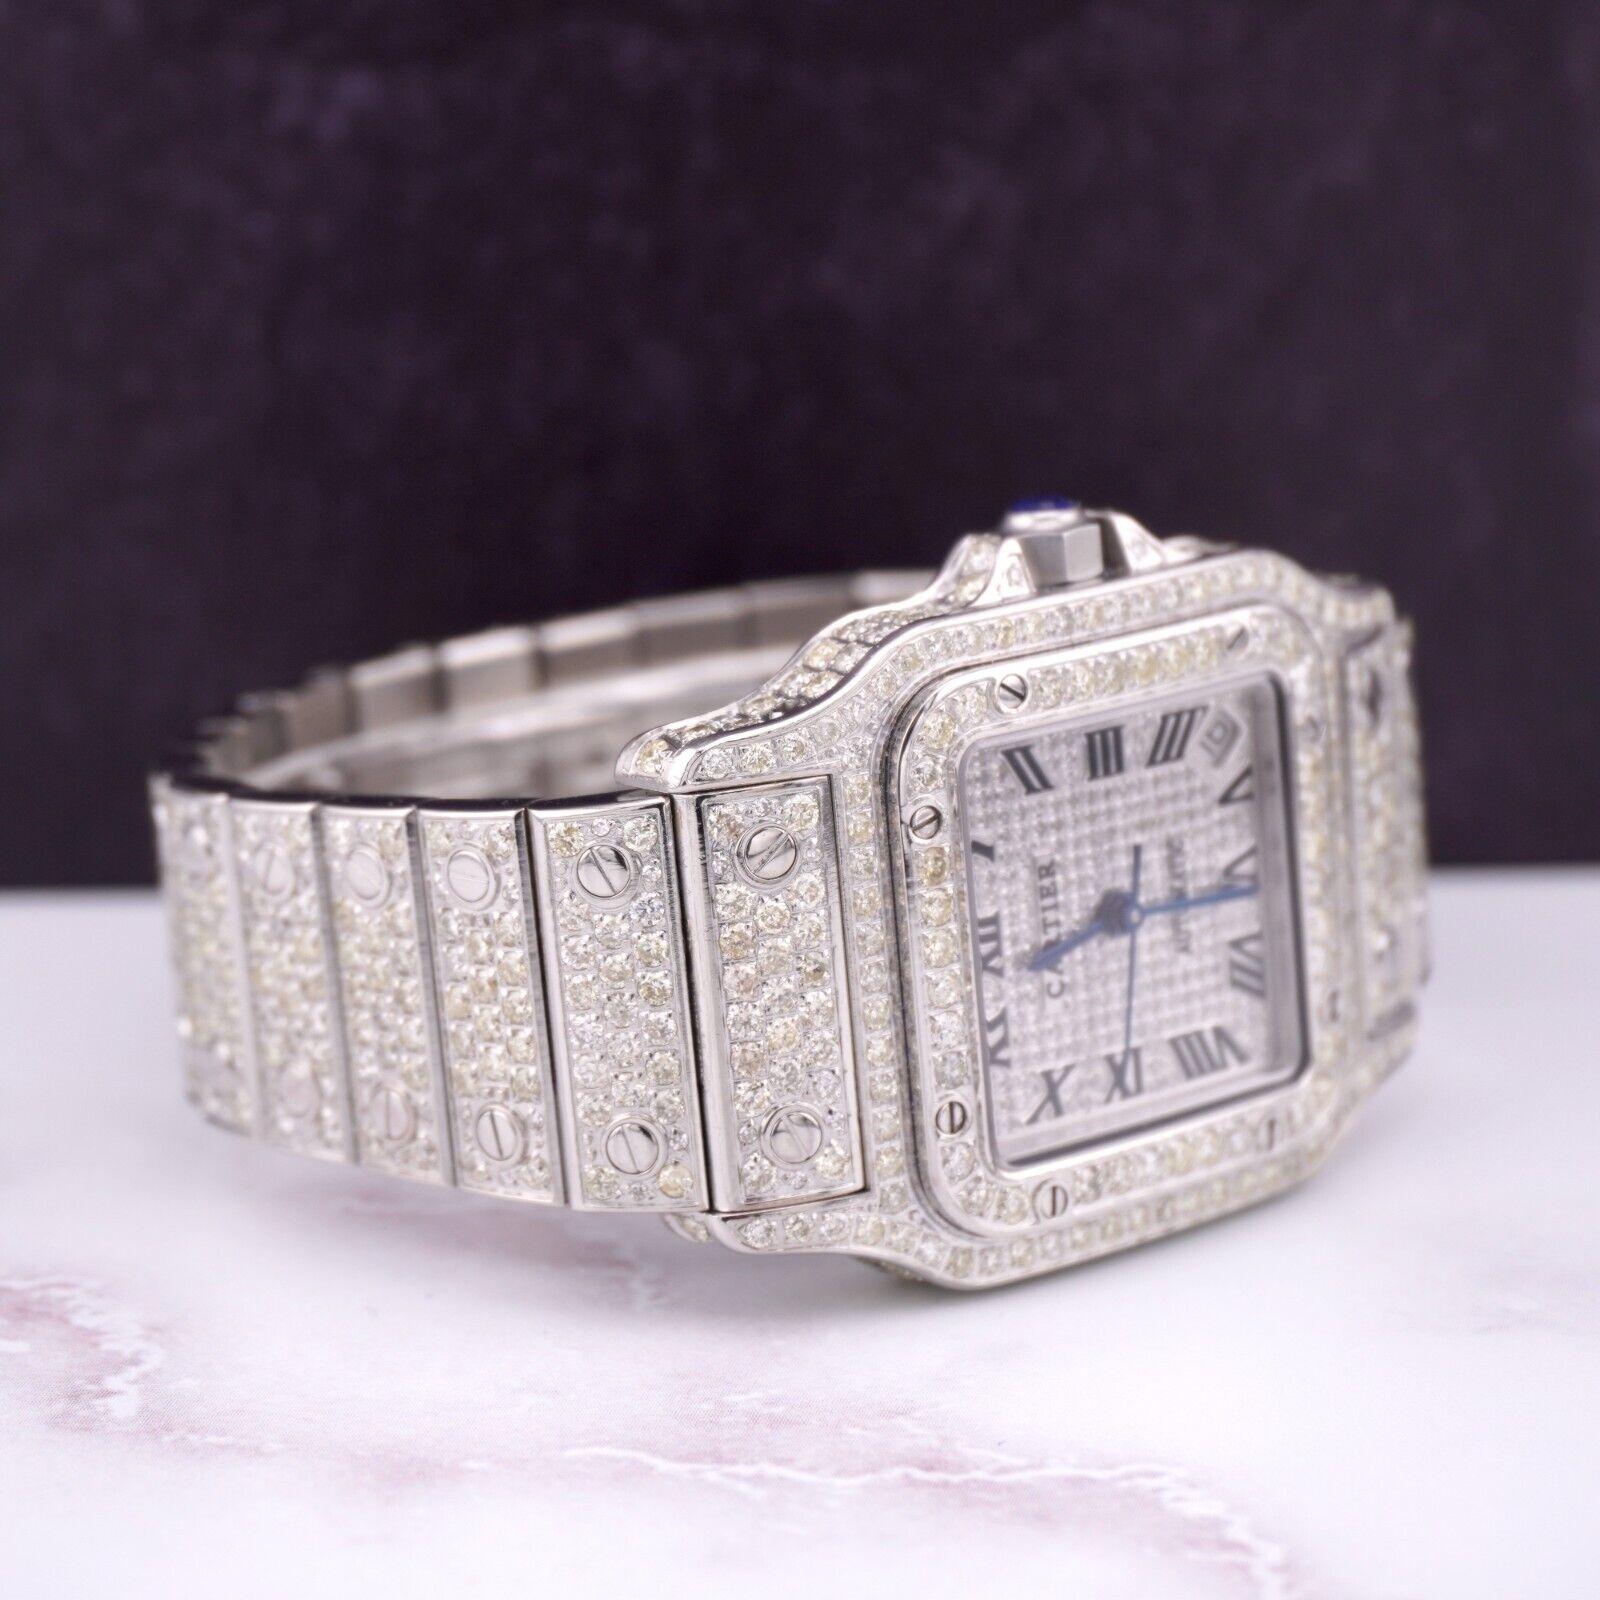 Cartier Santos Galbee 32mm Watch. A Pre-owned watch w/ Gift Box. Watch is 100% Authentic and Comes with Authenticity Card. Watch Reference is 2823 and is in Excellent Condition (See Pictures). The dial color is Silver is and material is Stainless